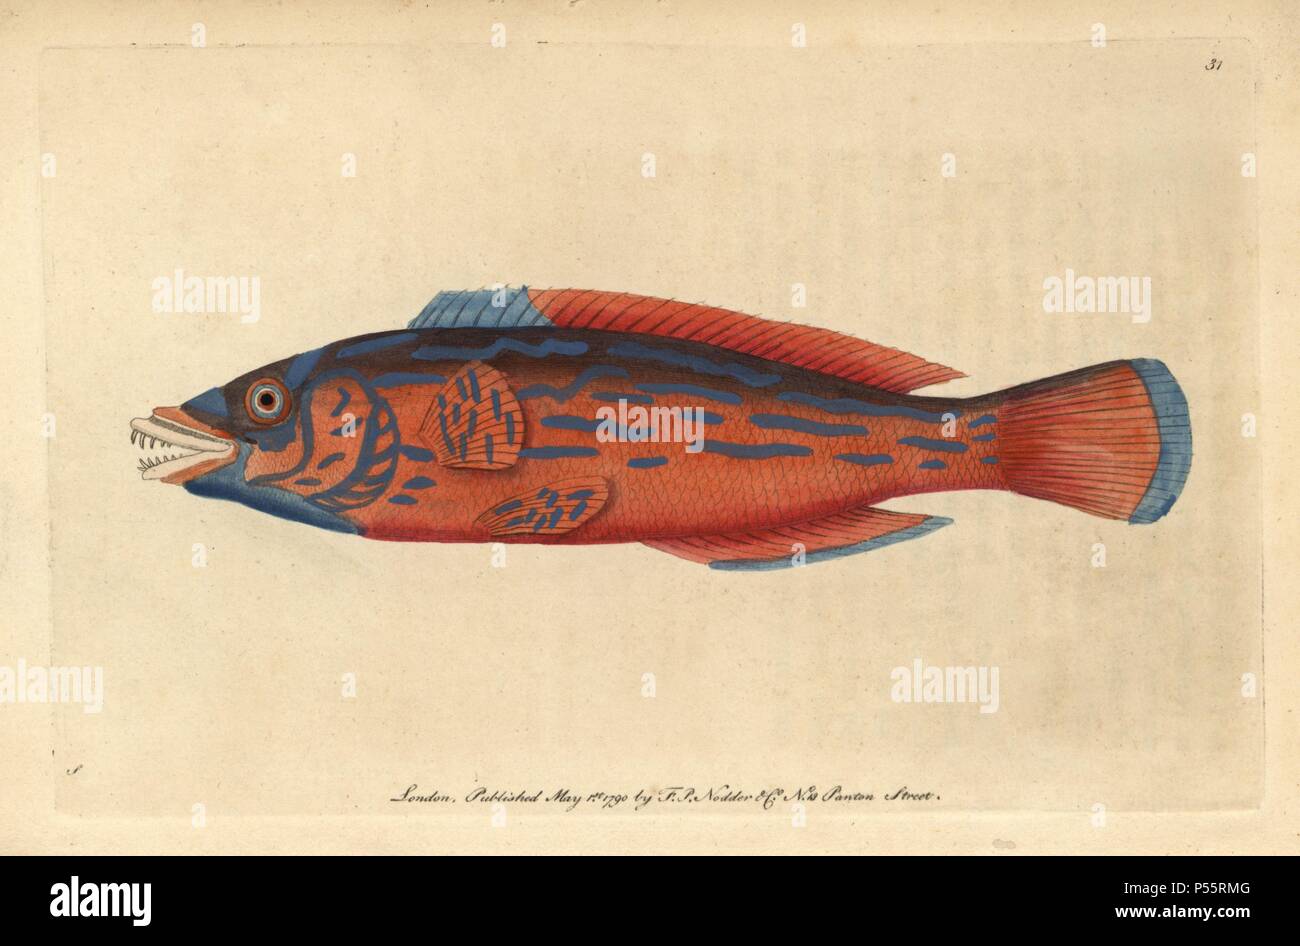 Beautiful sparus, Red sparus or Striped wrasse, cuckoo wrasse. Labrus bimaculatus, L. mixtus (Sparus formosus). Illustration signed S (George Shaw).. Handcolored copperplate engraving from George Shaw and Frederick Nodder's 'The Naturalist's Miscellany' 1790.. Frederick Polydore Nodder (17511801?) was a gifted natural history artist and engraver. Nodder honed his draftsmanship working on Captain Cook and Joseph Banks' Florilegium and engraving Sydney Parkinson's sketches of Australian plants. He was made 'botanic painter to her majesty' Queen Charlotte in 1785. Nodder also drew the botanical  Stock Photo